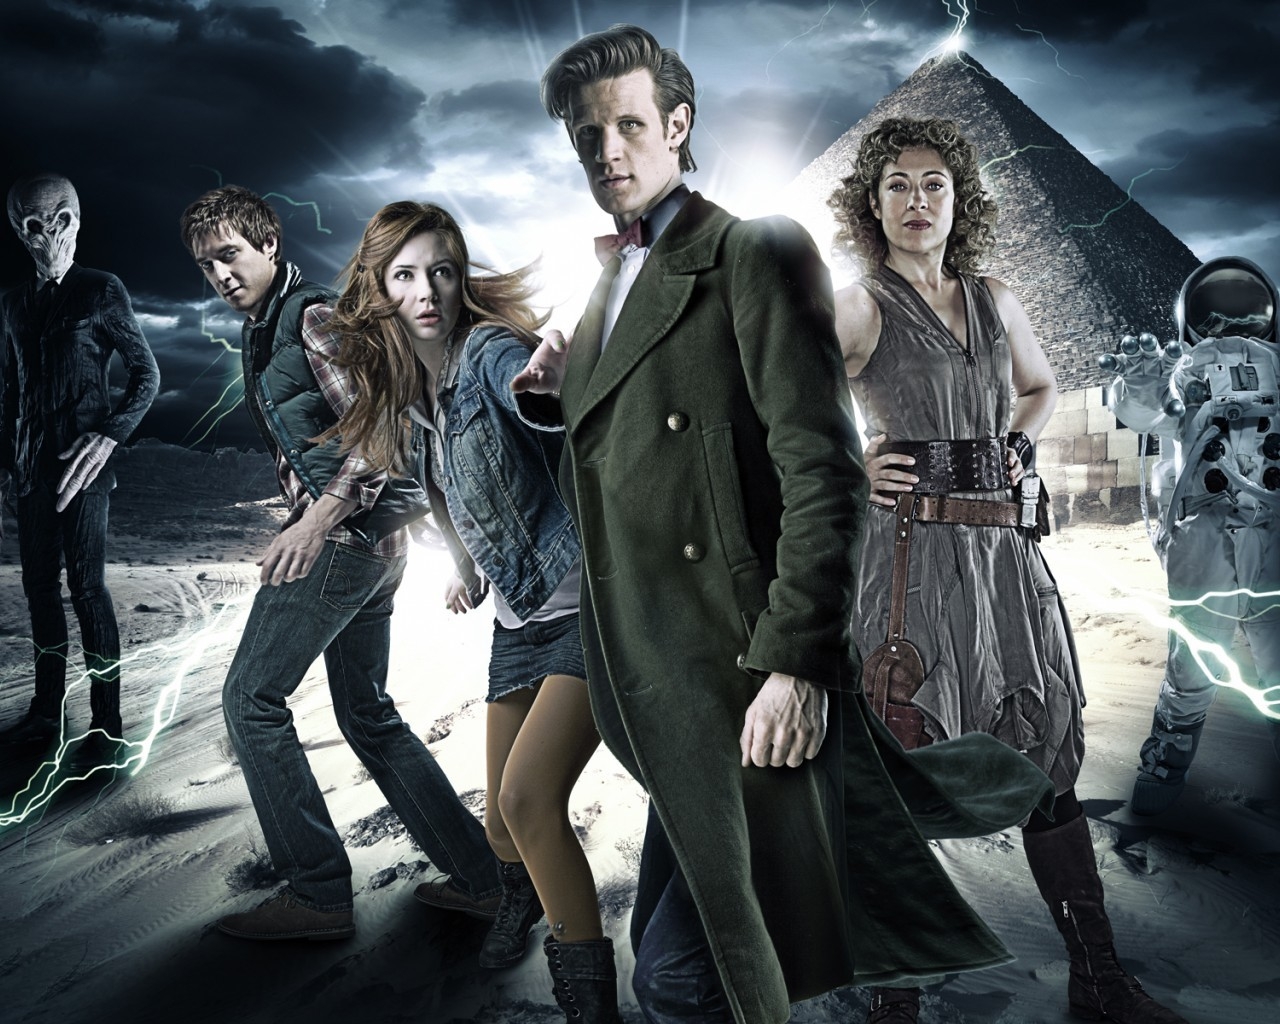 Doctor Who Poster for 1280 x 1024 resolution